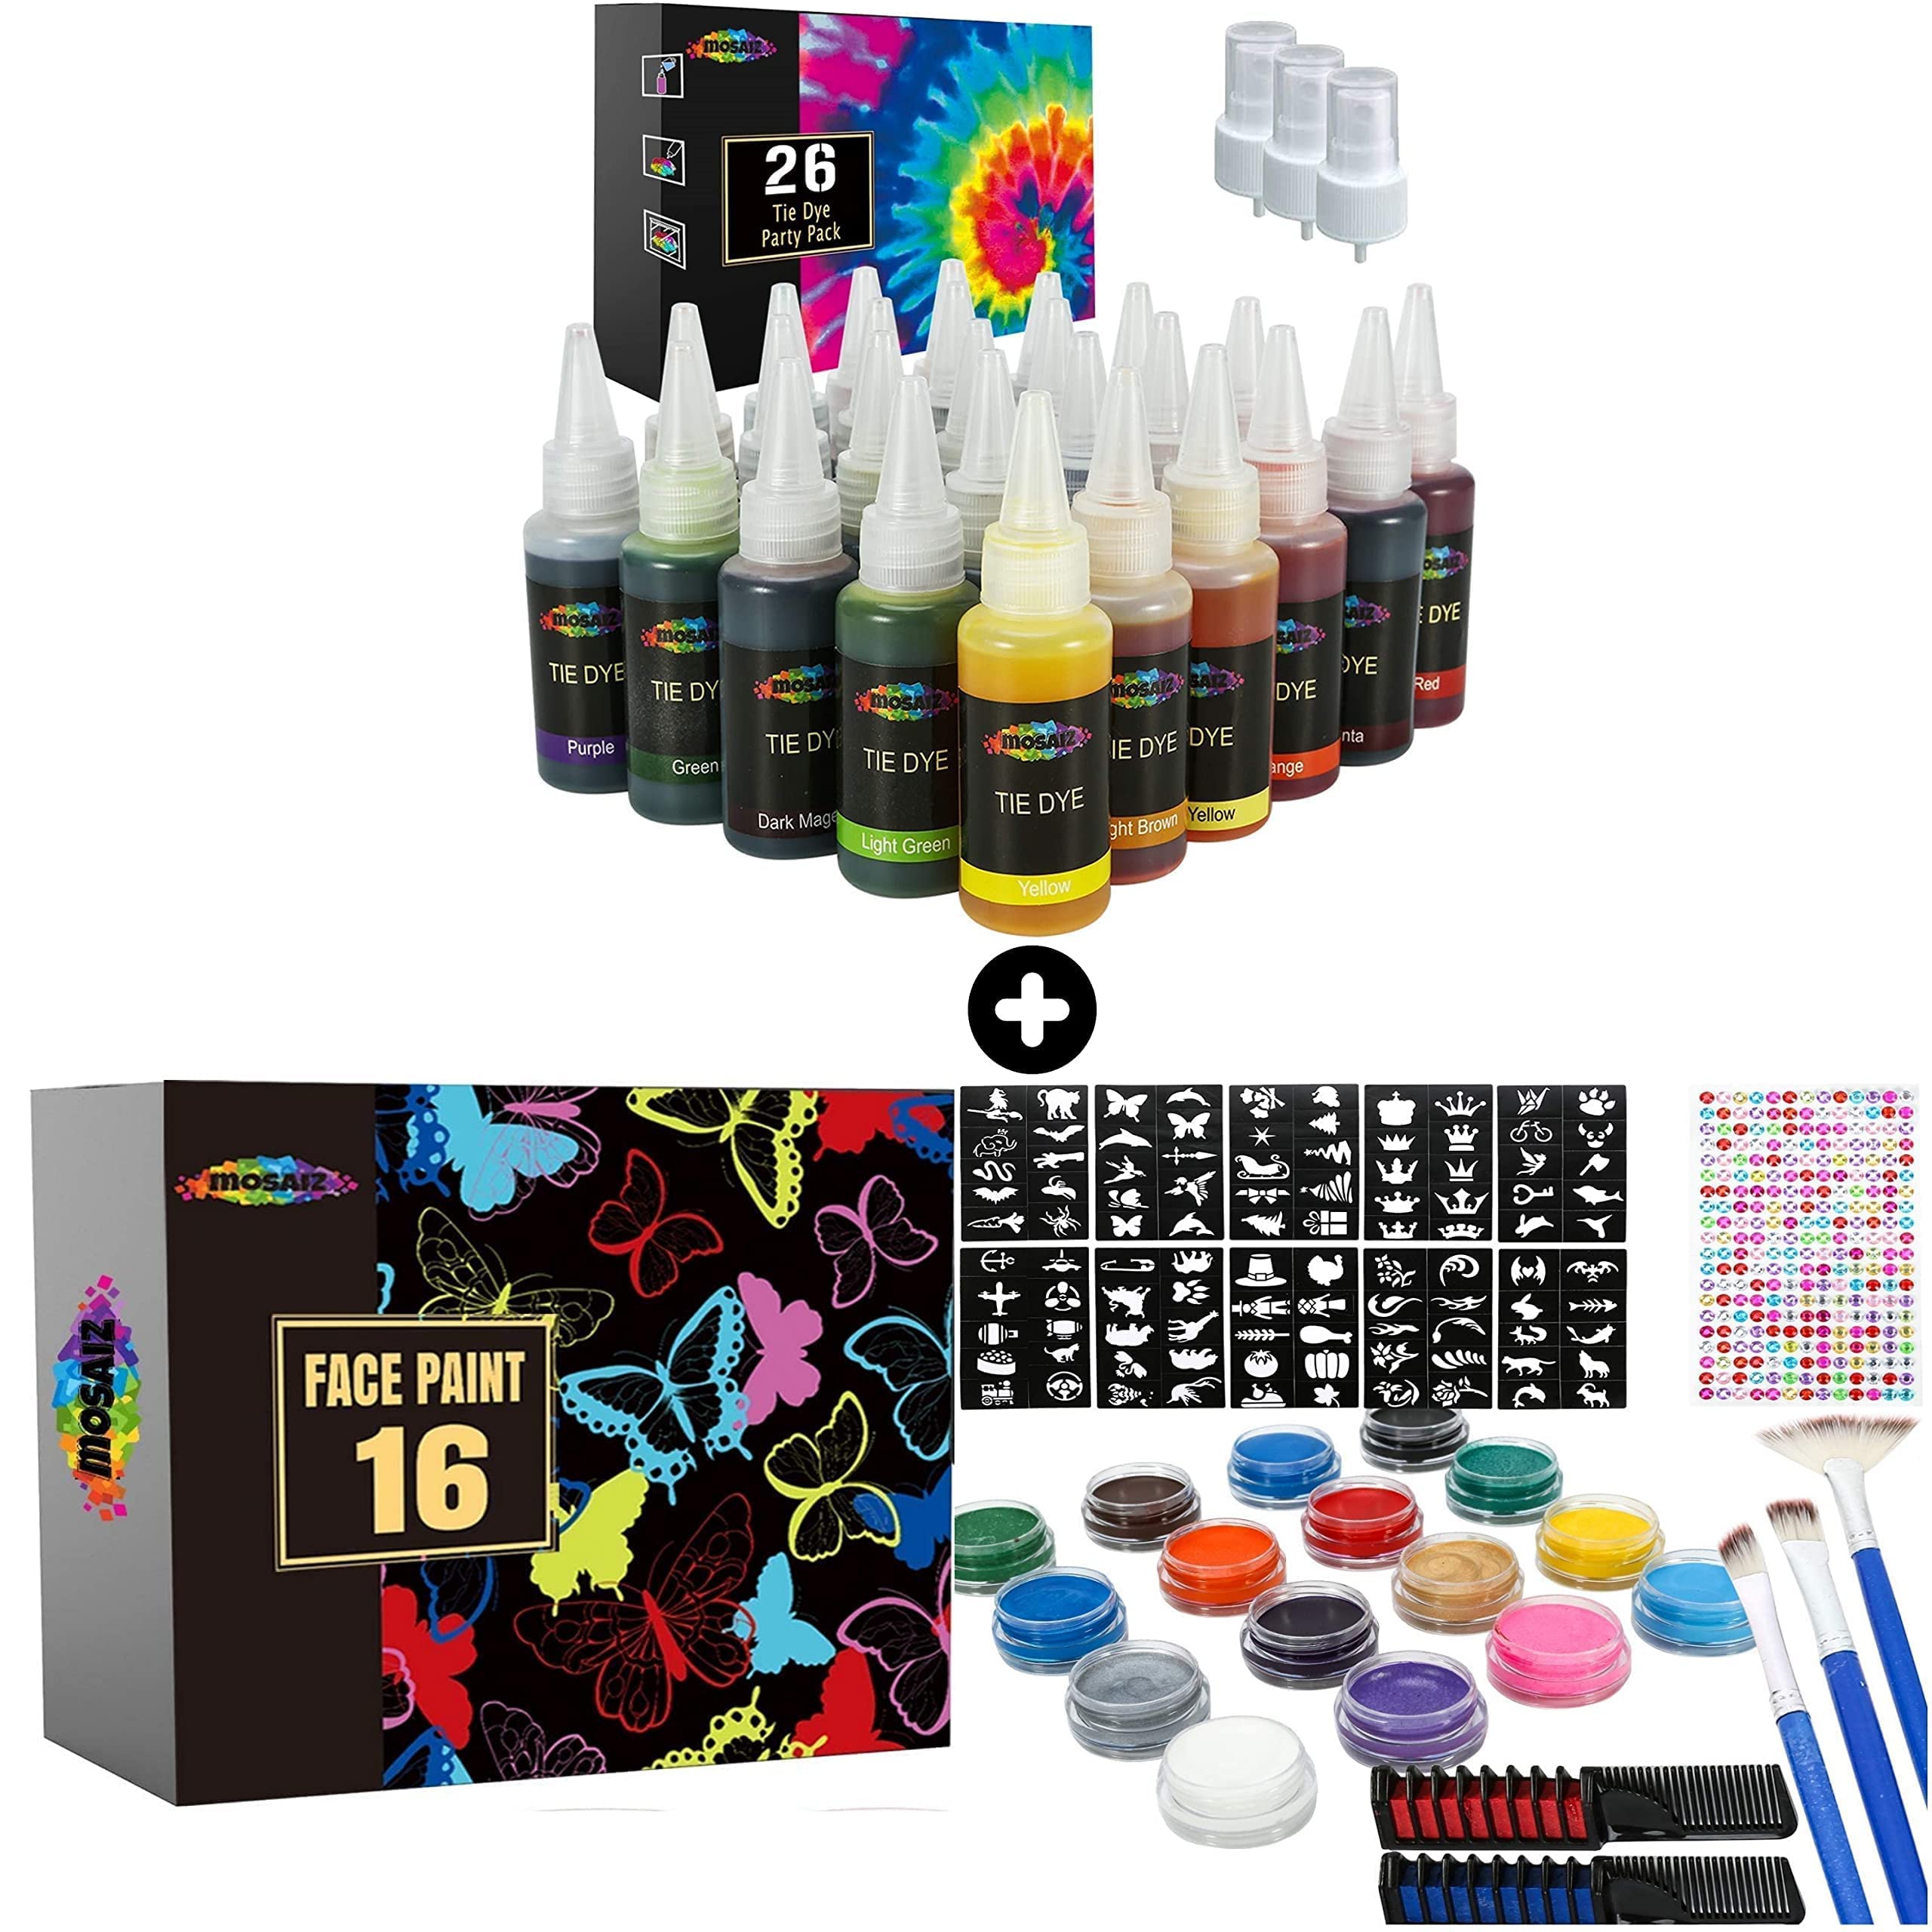 Mosaiz Tie Dye Kit 26 Colors with Spray Nozzles for Fabric Bundle with Face Paint Kit 16 Colors Including Metallic Gold and Silver Colors, 2 Hair Chalk, 3 Brushes, 260 Adhesive Gems and 100 Stencils